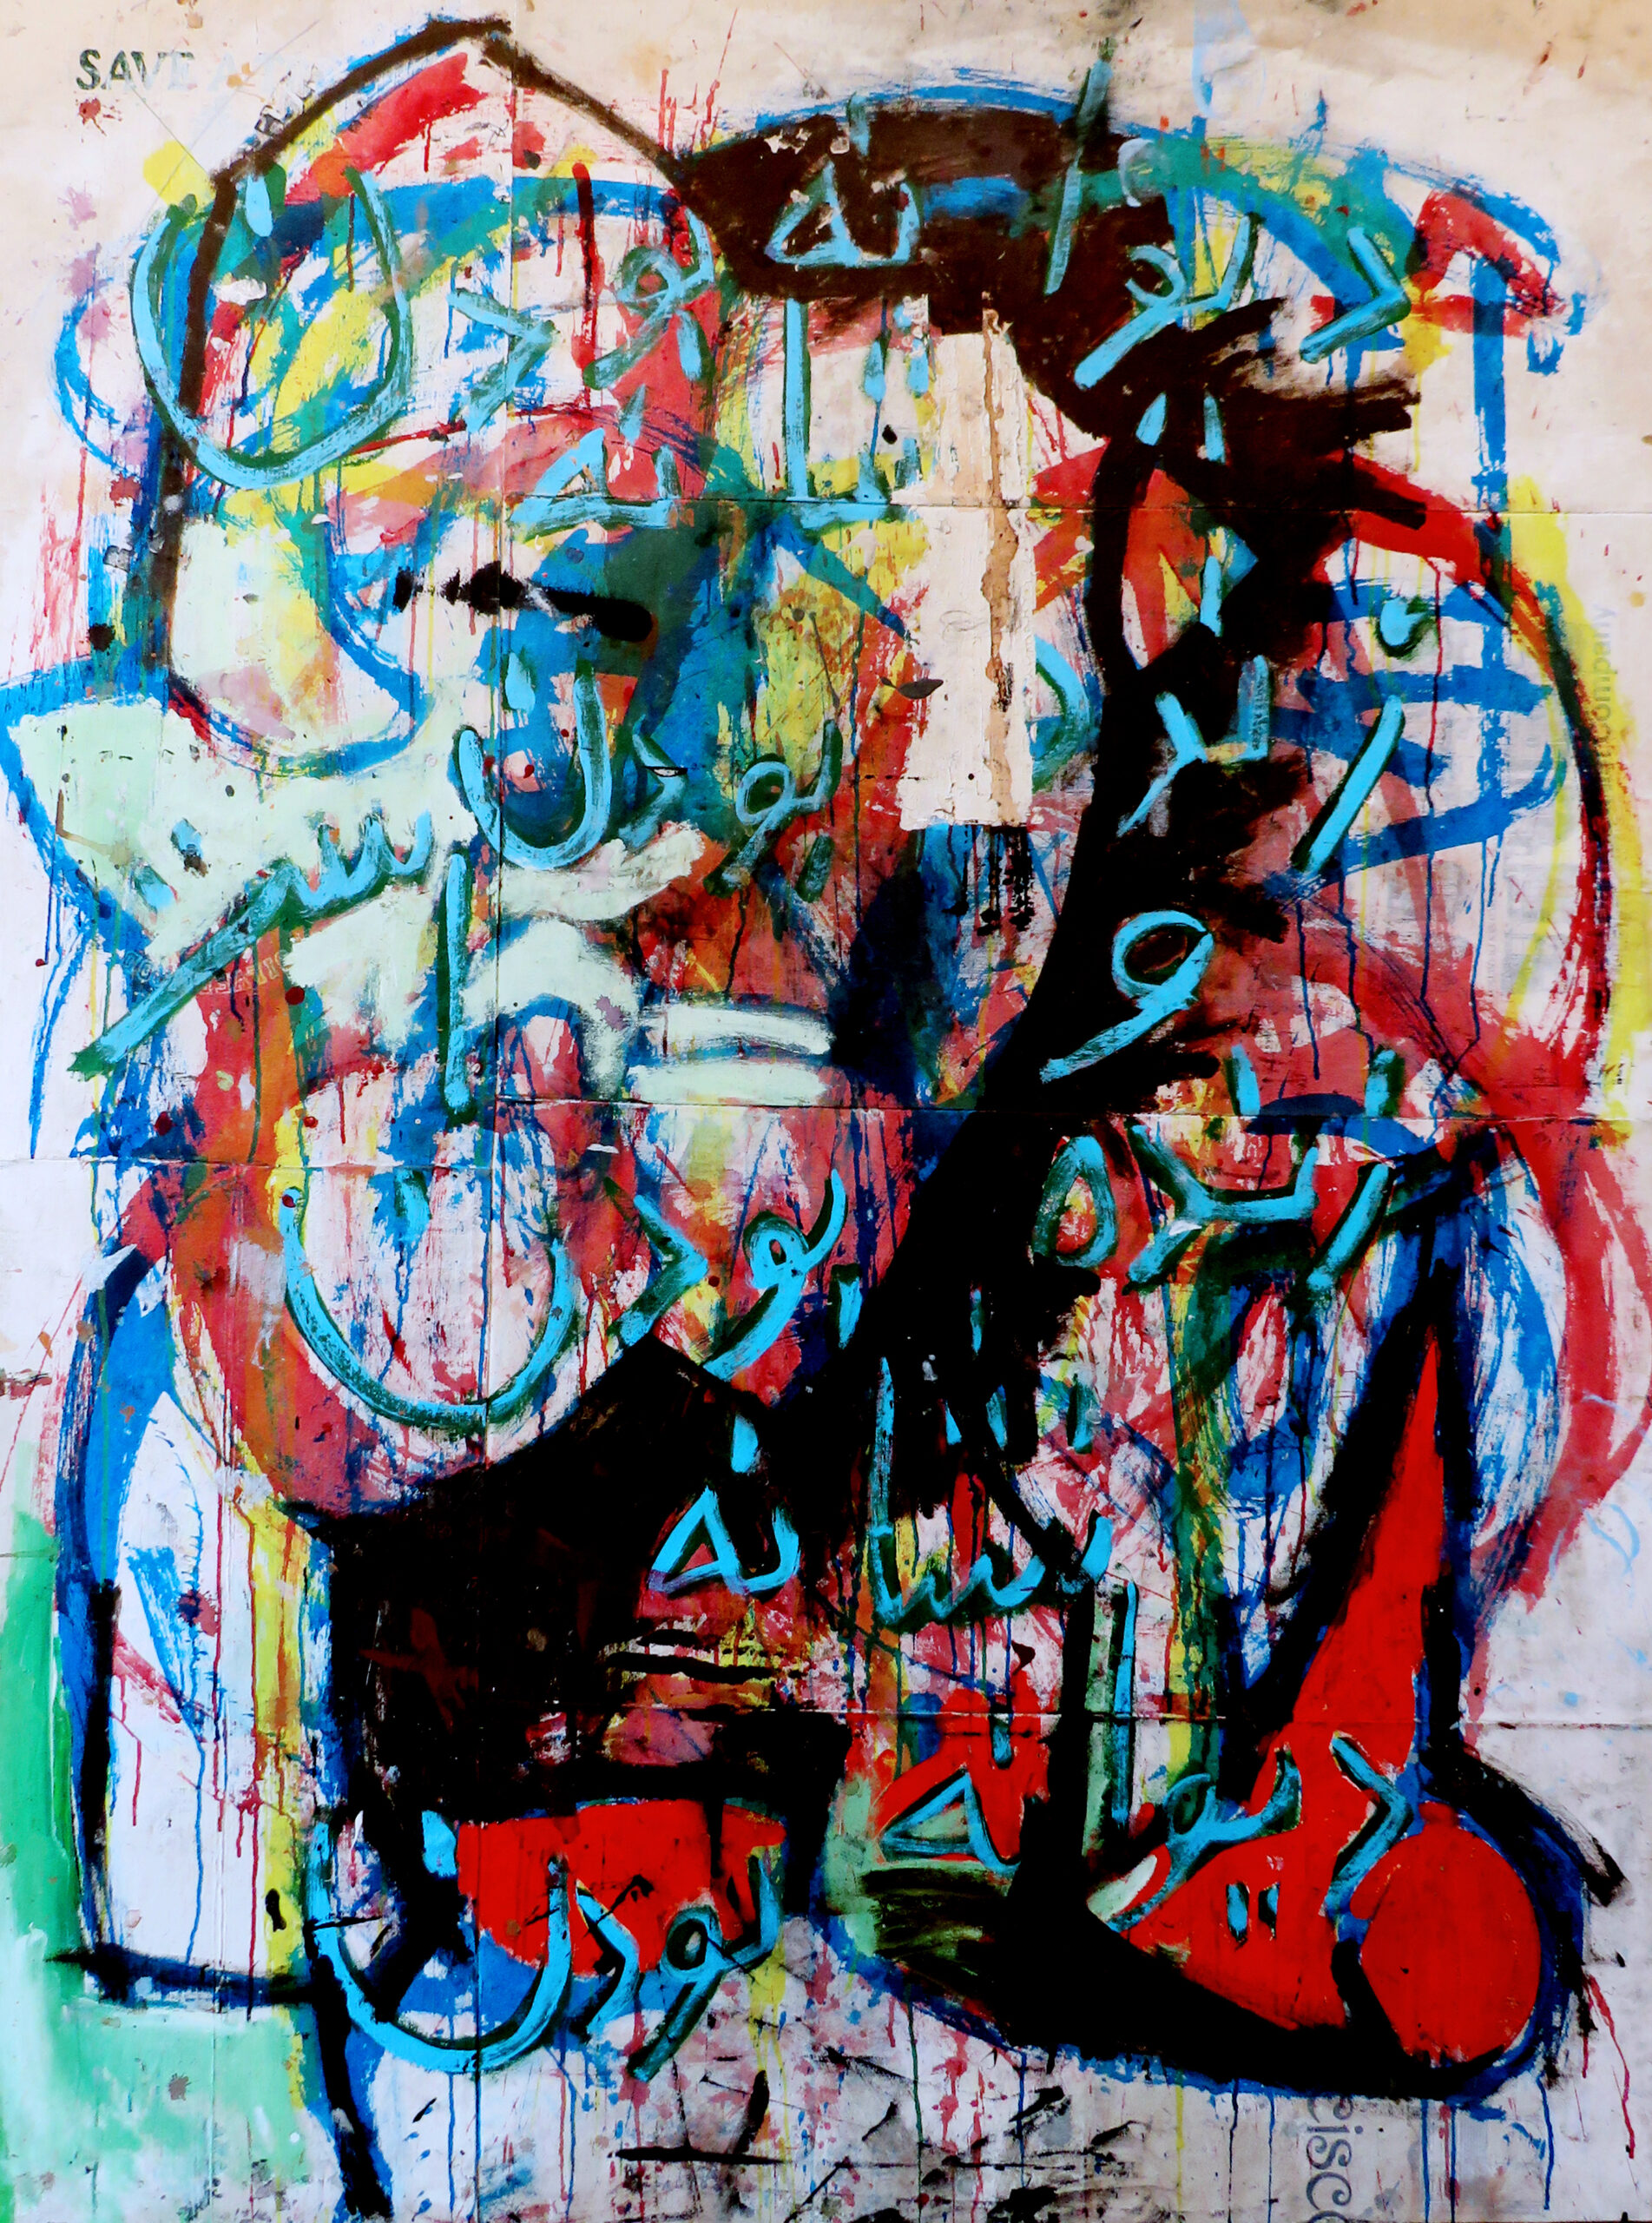 "Mad to Live," a silk screen print layered with mixed media, created by Iranian artist Ali Dadgar